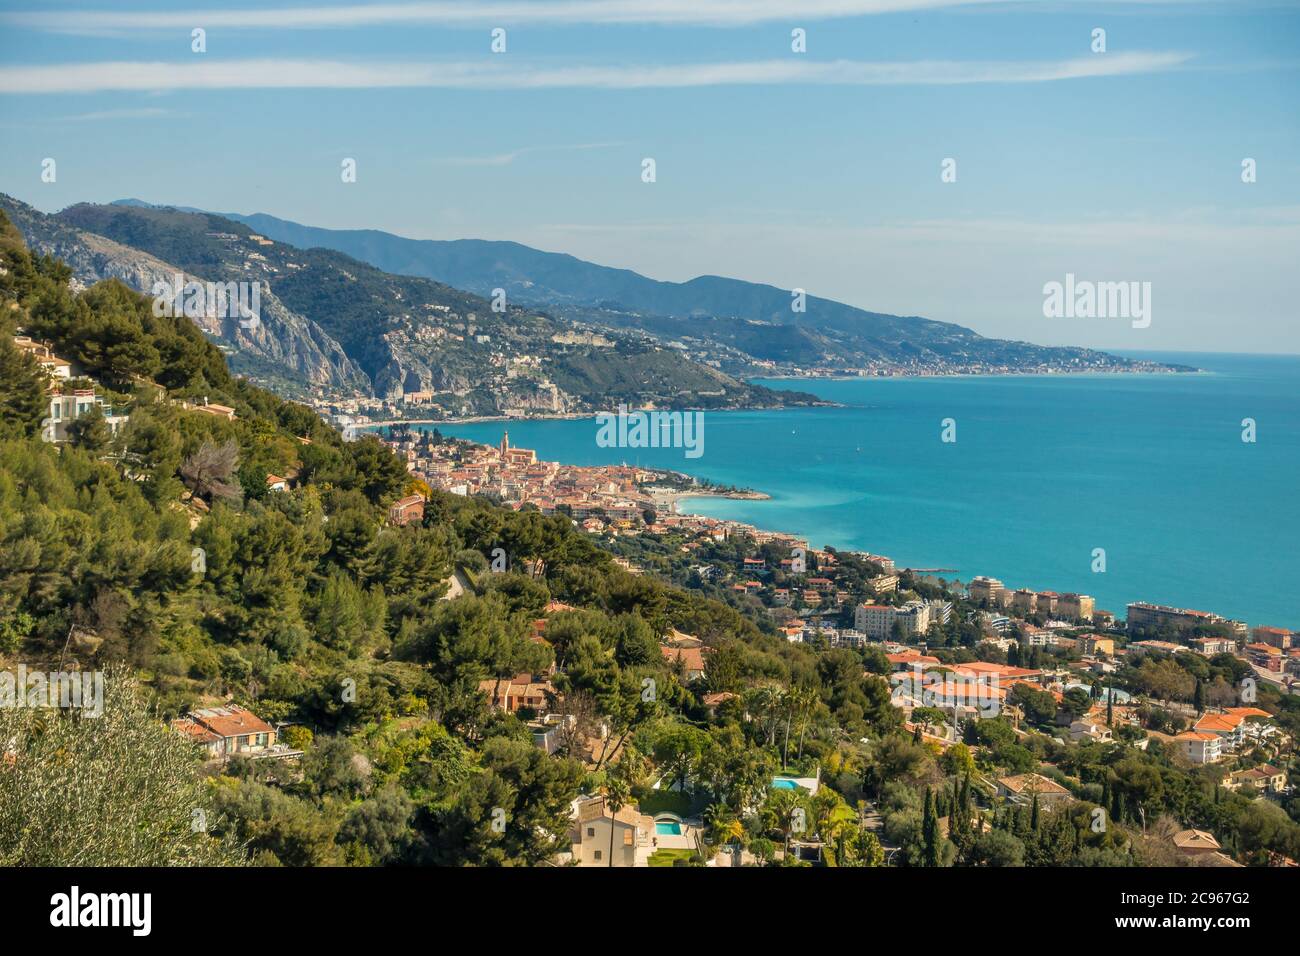 Elevated view from Roquebrune over to Menton and Liguria (Italy), Cote d'Azur, France, Europe Stock Photo